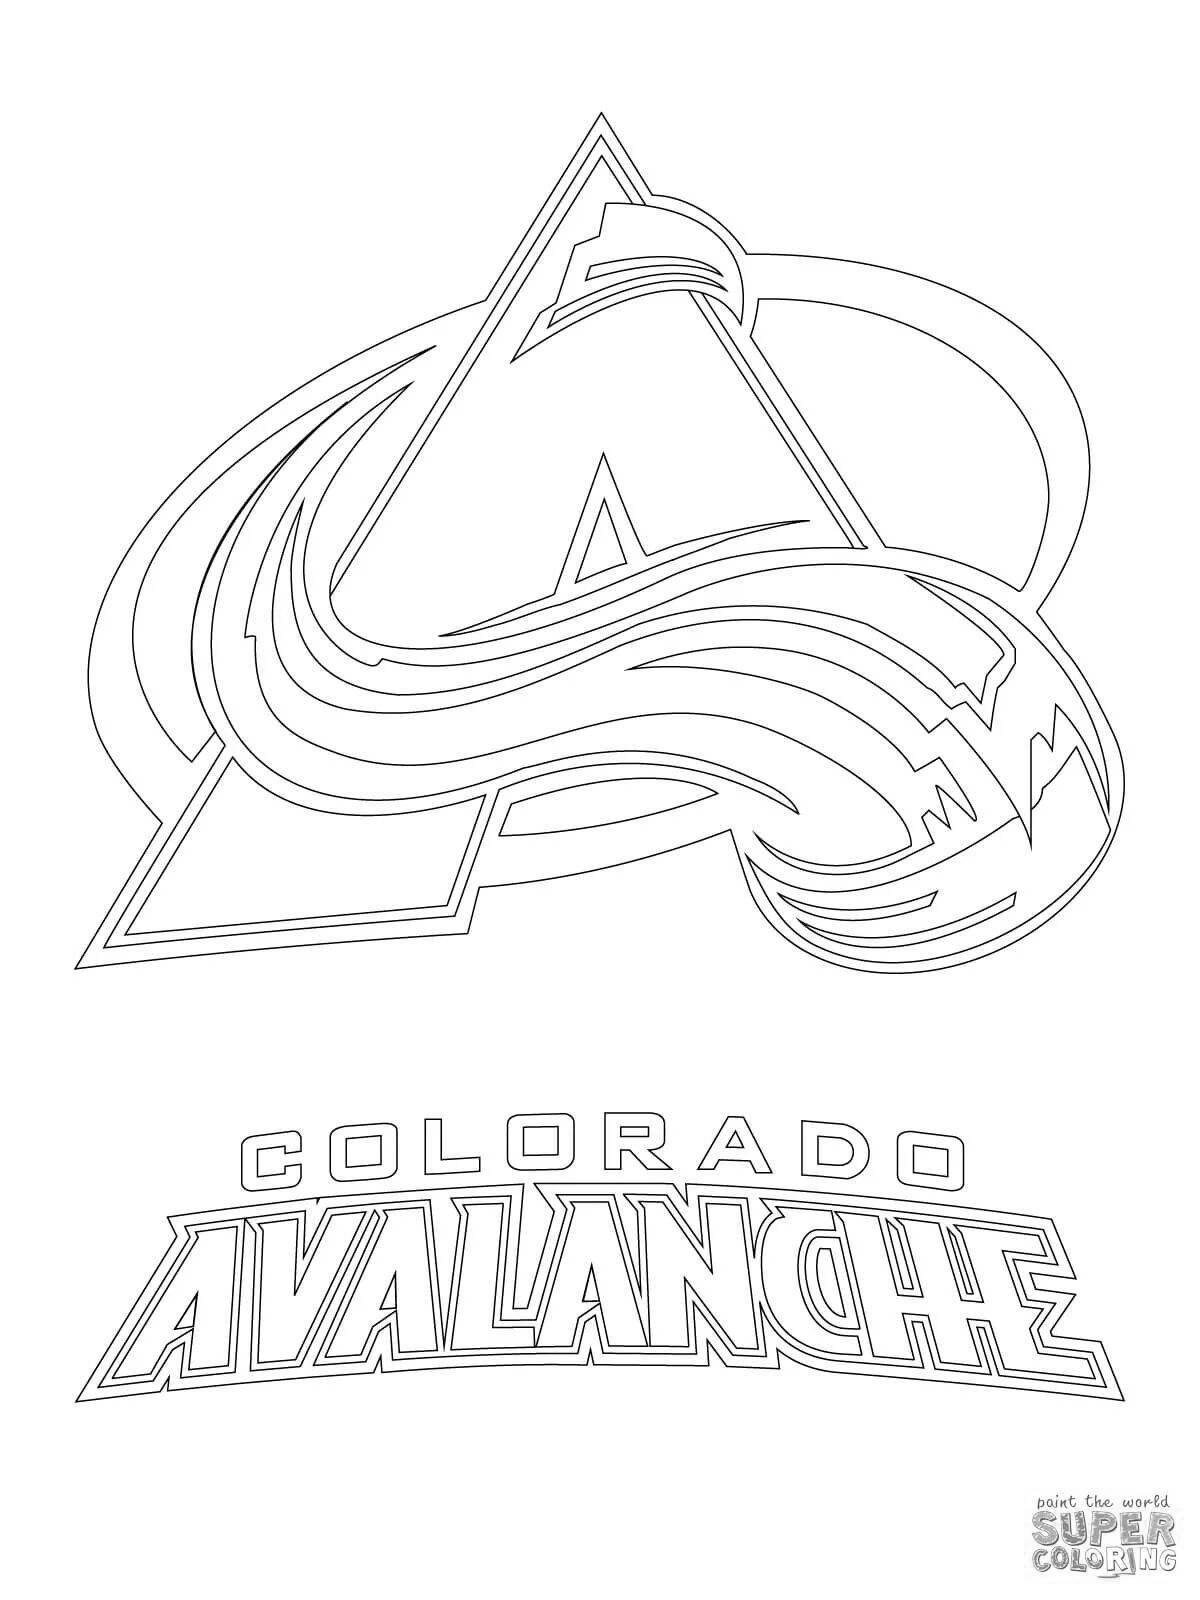 Awesome nhl hockey coloring pages